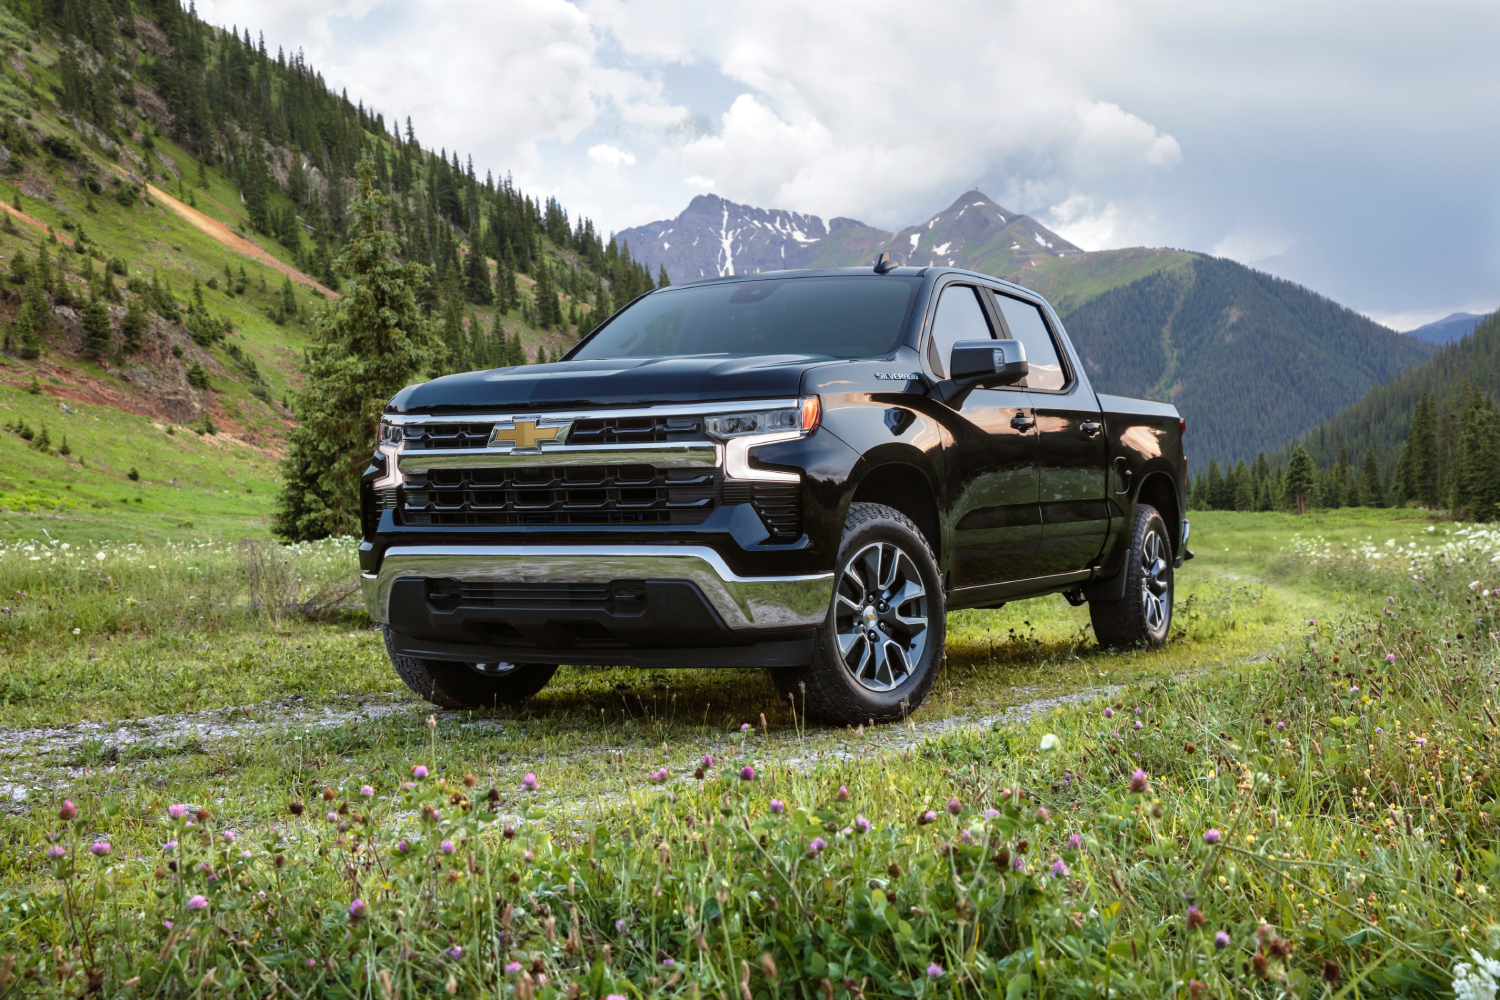 The 2022 Chevrolet Silverado 1500 Is One of Consumer Reports Worst Trucks Again